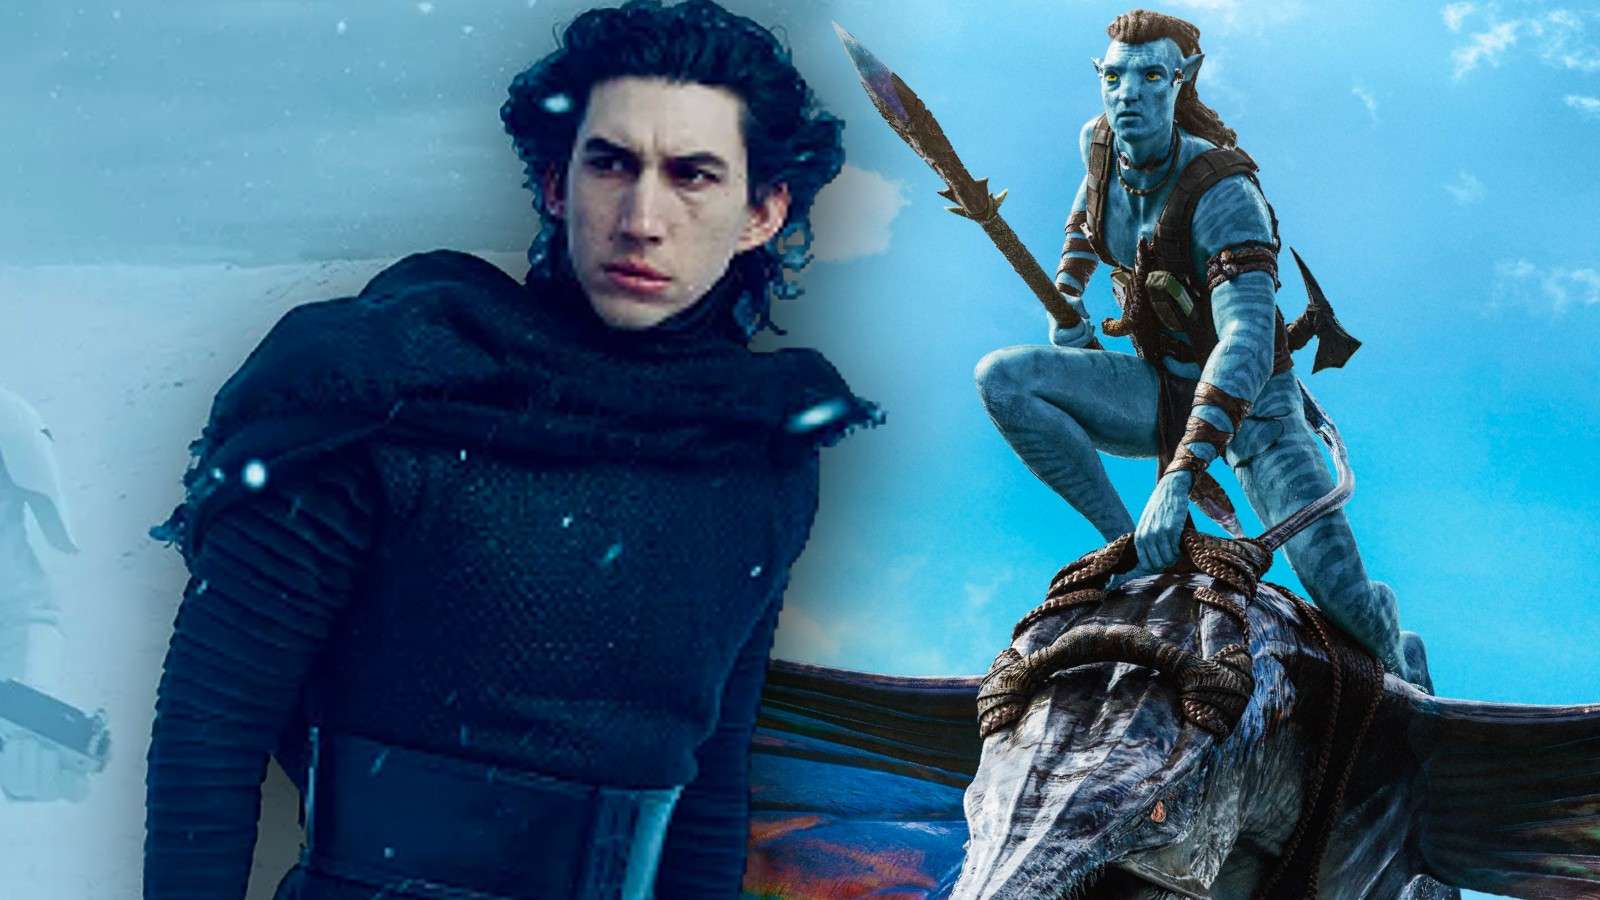 Kylo Ren in Star Wars: The Force Awakens and a poster for Avatar: The Way of Water dos de las películas más caras